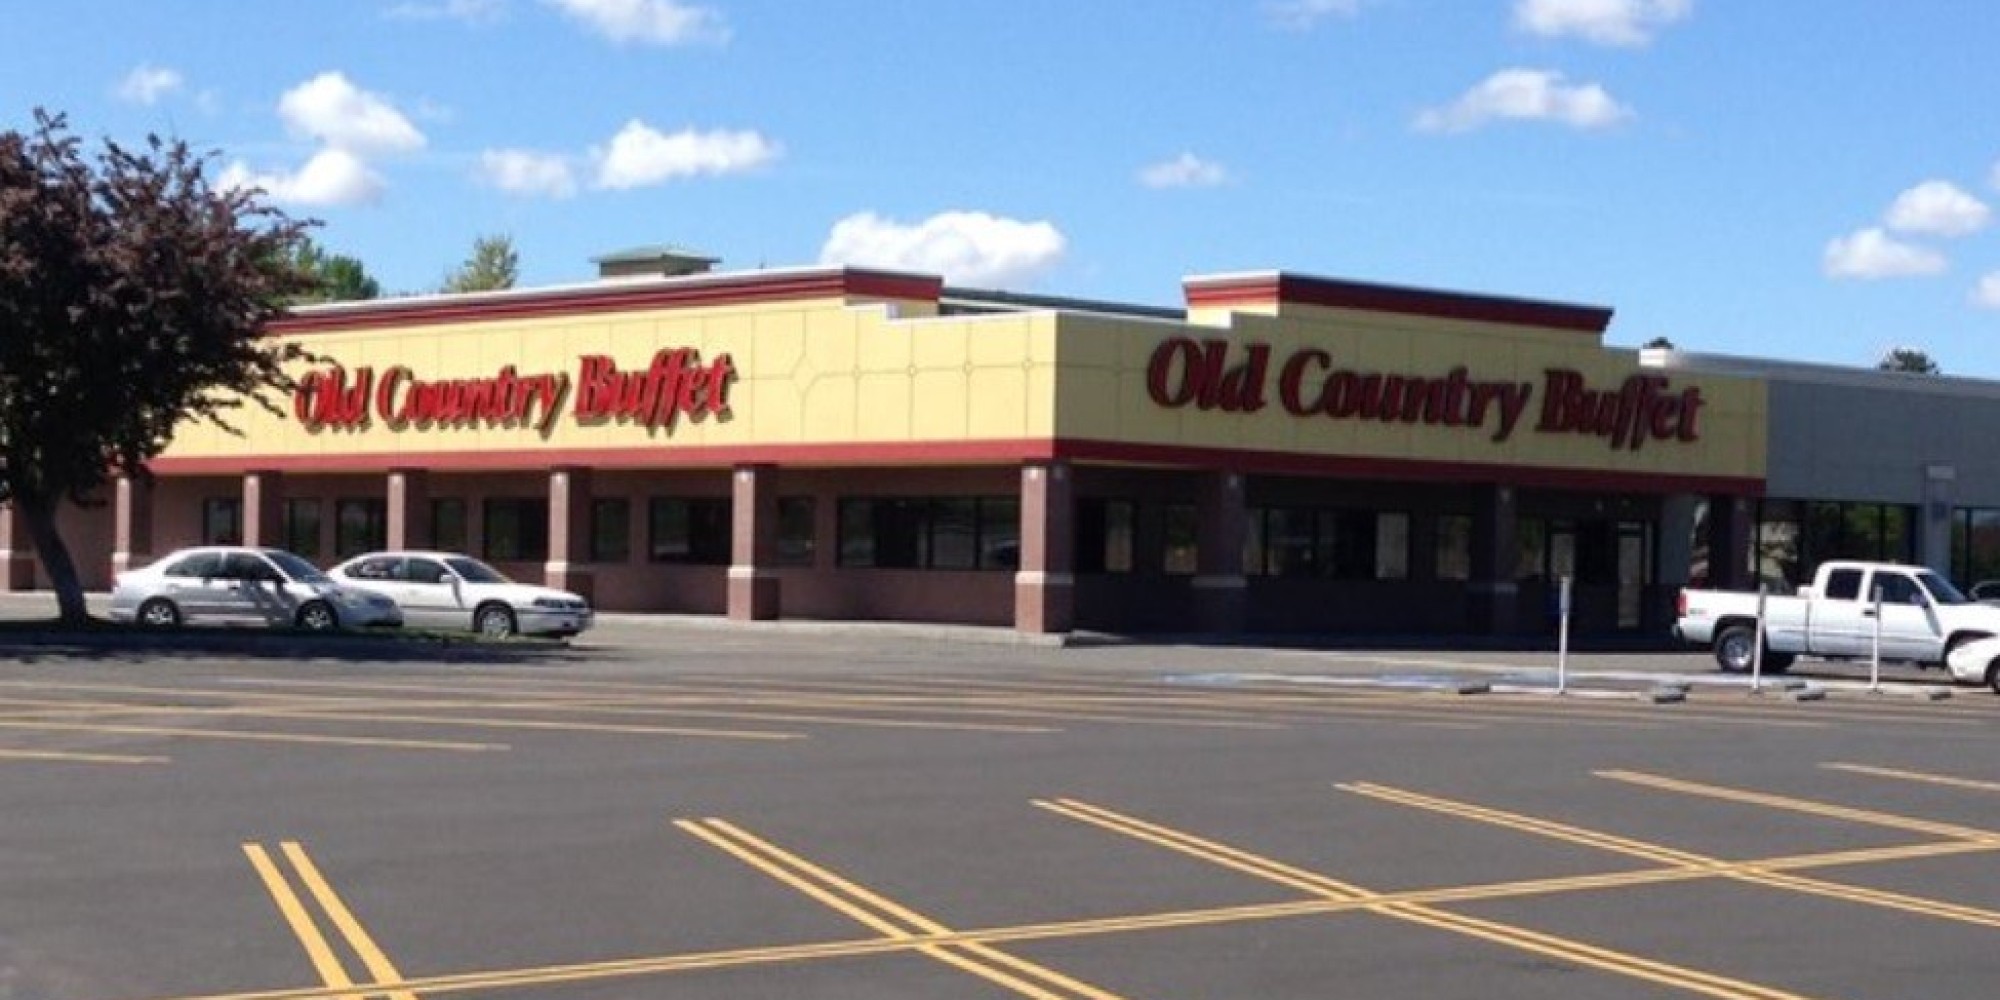 Old country buffet in ford city #4